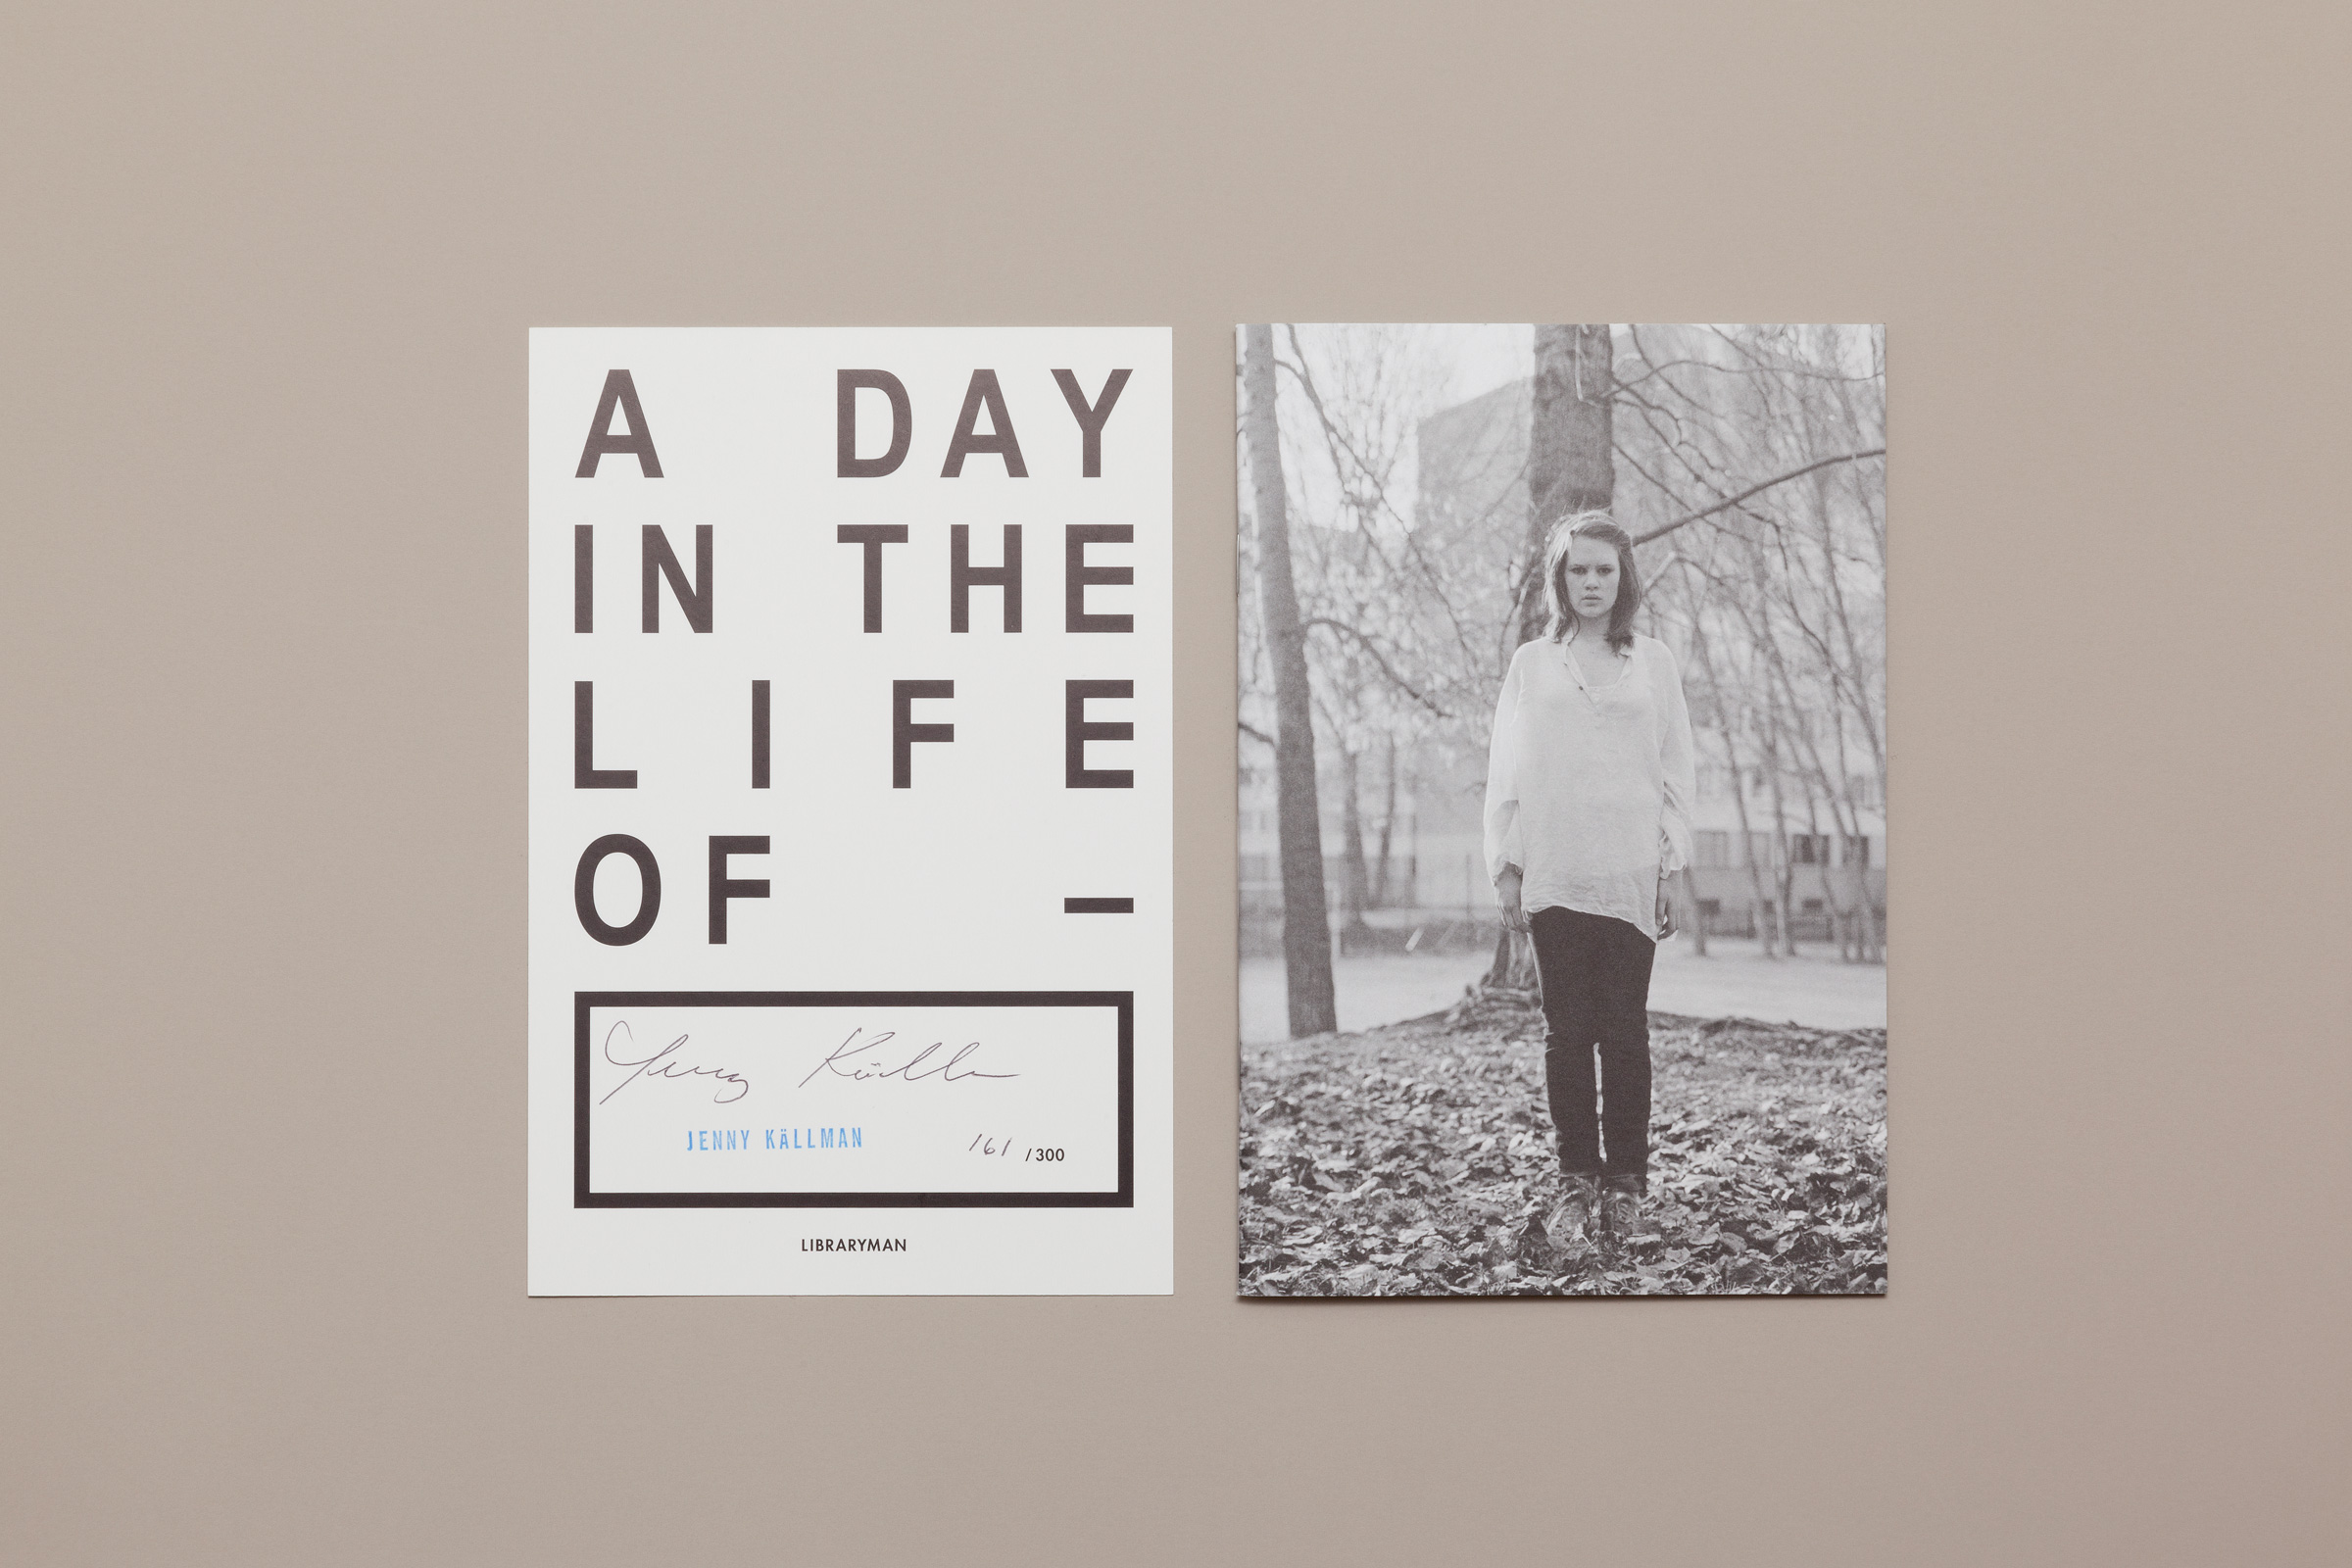 A Day in the Life of... Jenny Källman